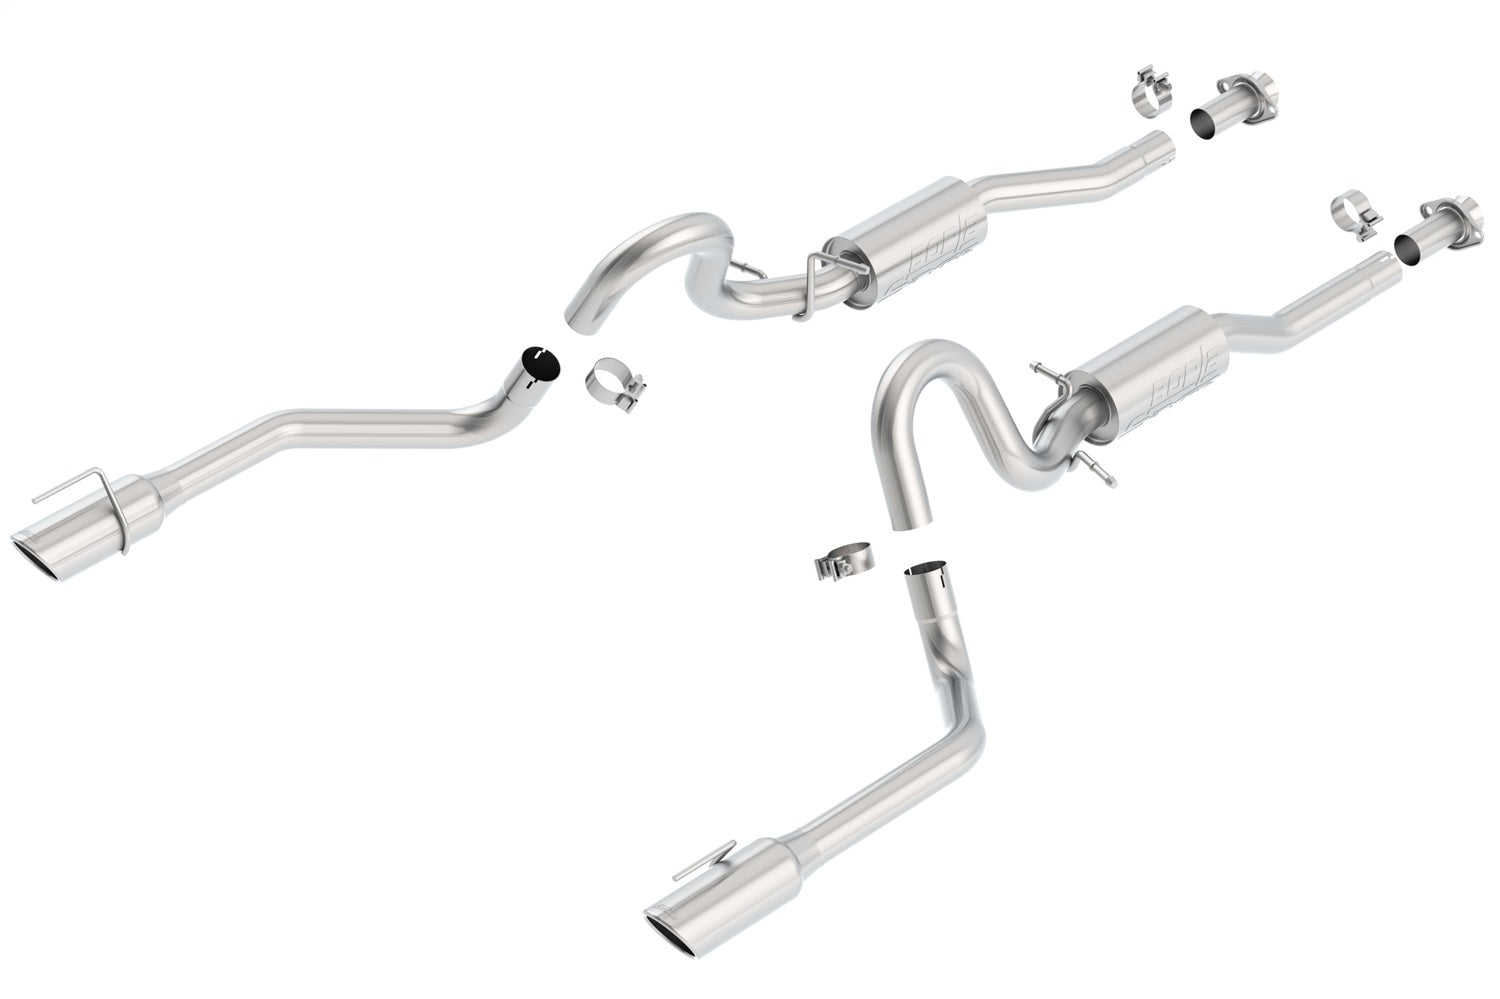 Borla 140067 S-Type Cat-Back Exhaust System Fits 99-04 Mustang